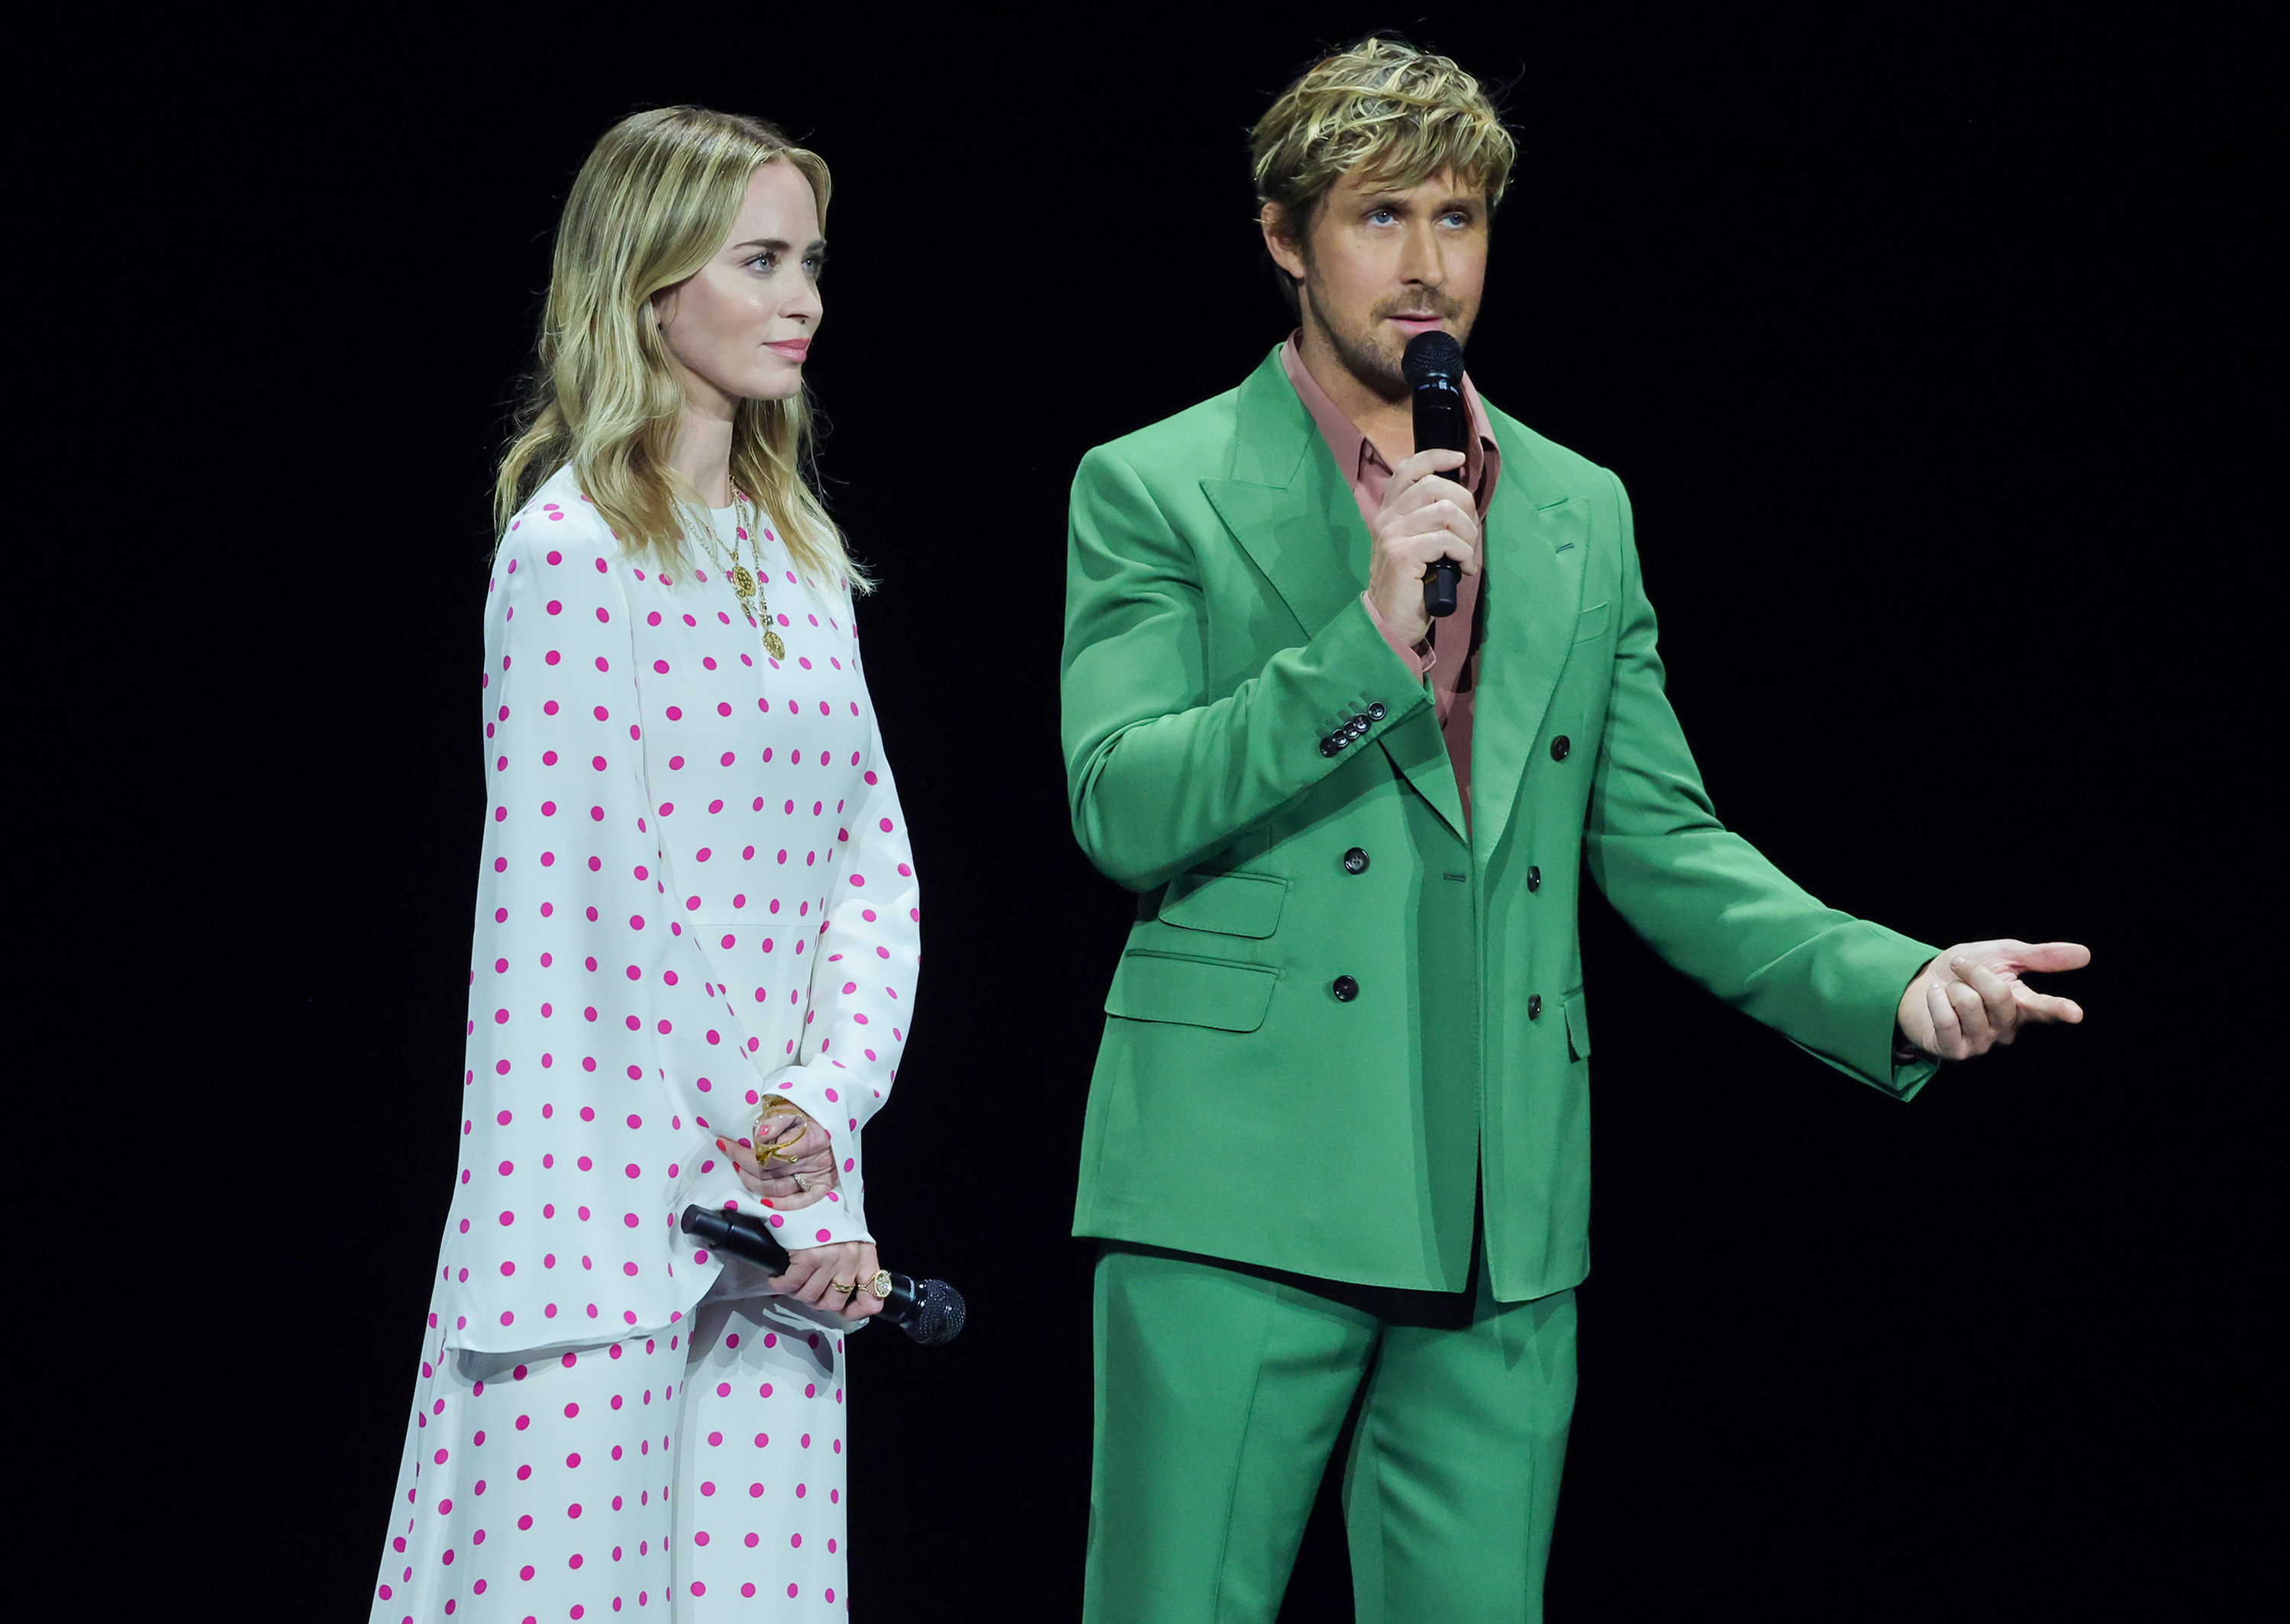 Ryan in a green suit standing next to Emily Blunt